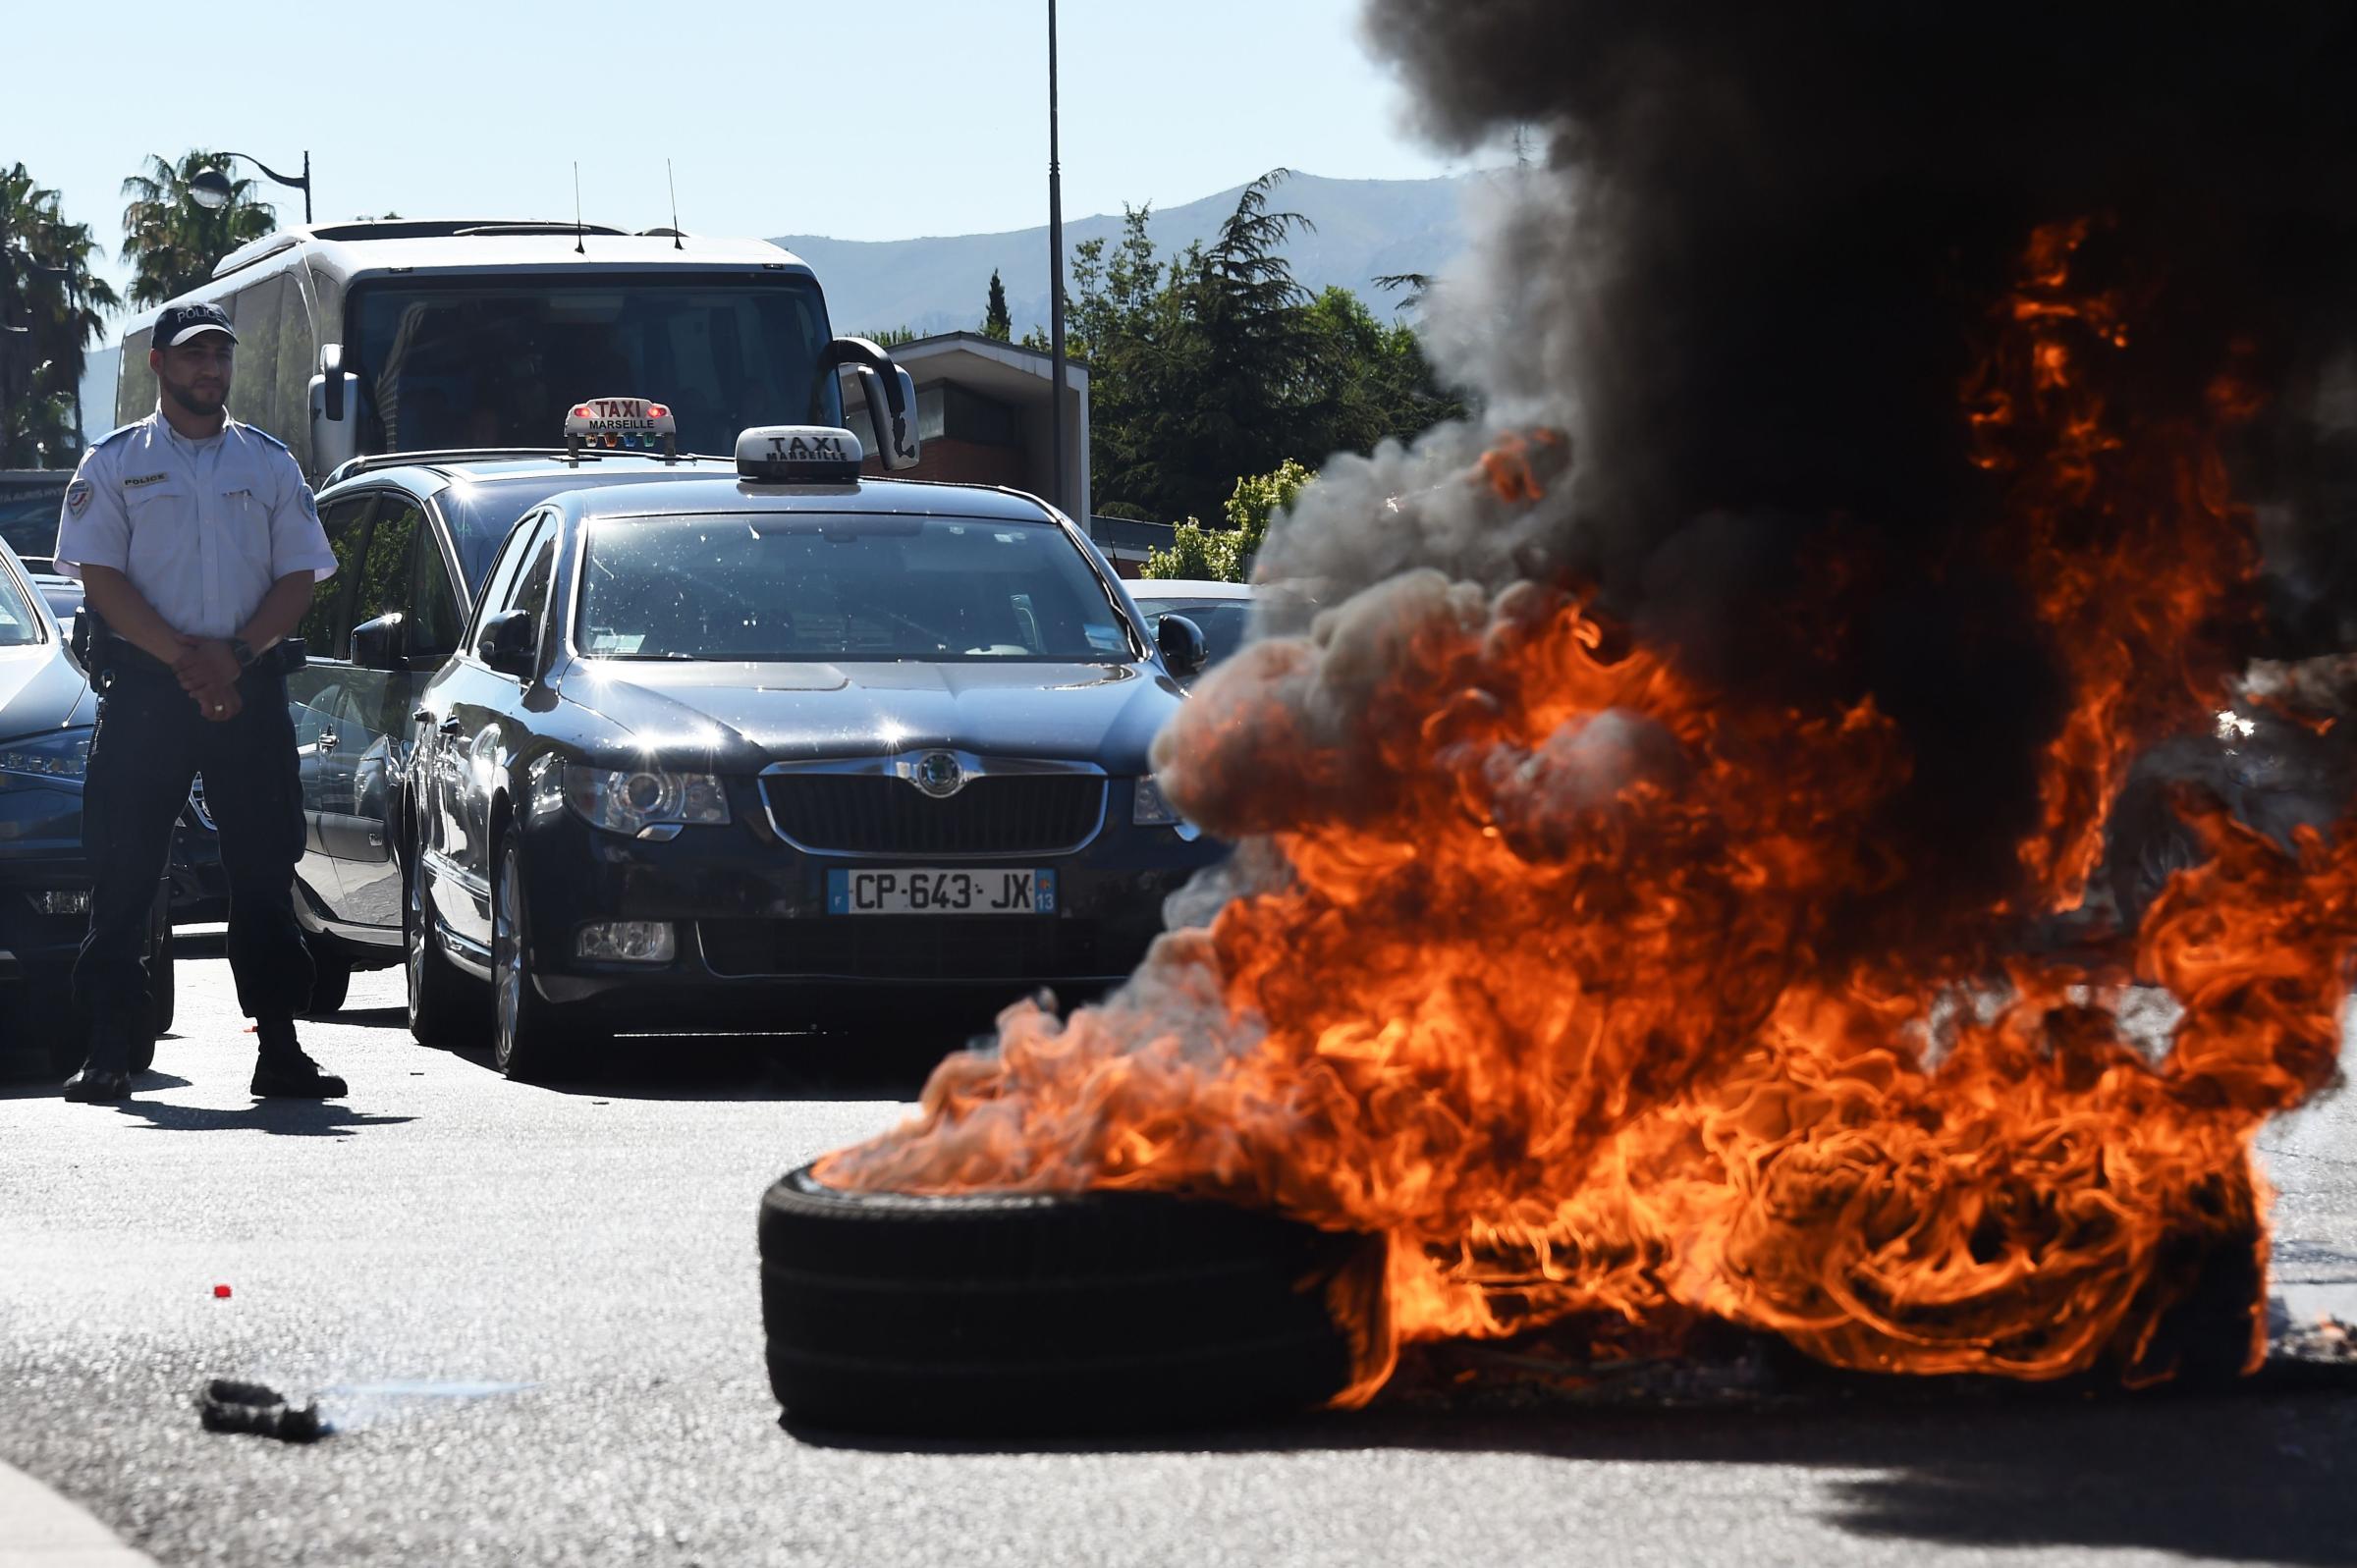 French Taxi drivers burn tires as they protest in the southern city of Marseille on June 25, 2015 as they demonstrate against UberPOP, a popular taxi app that is facing fierce opposition from traditional cabs.